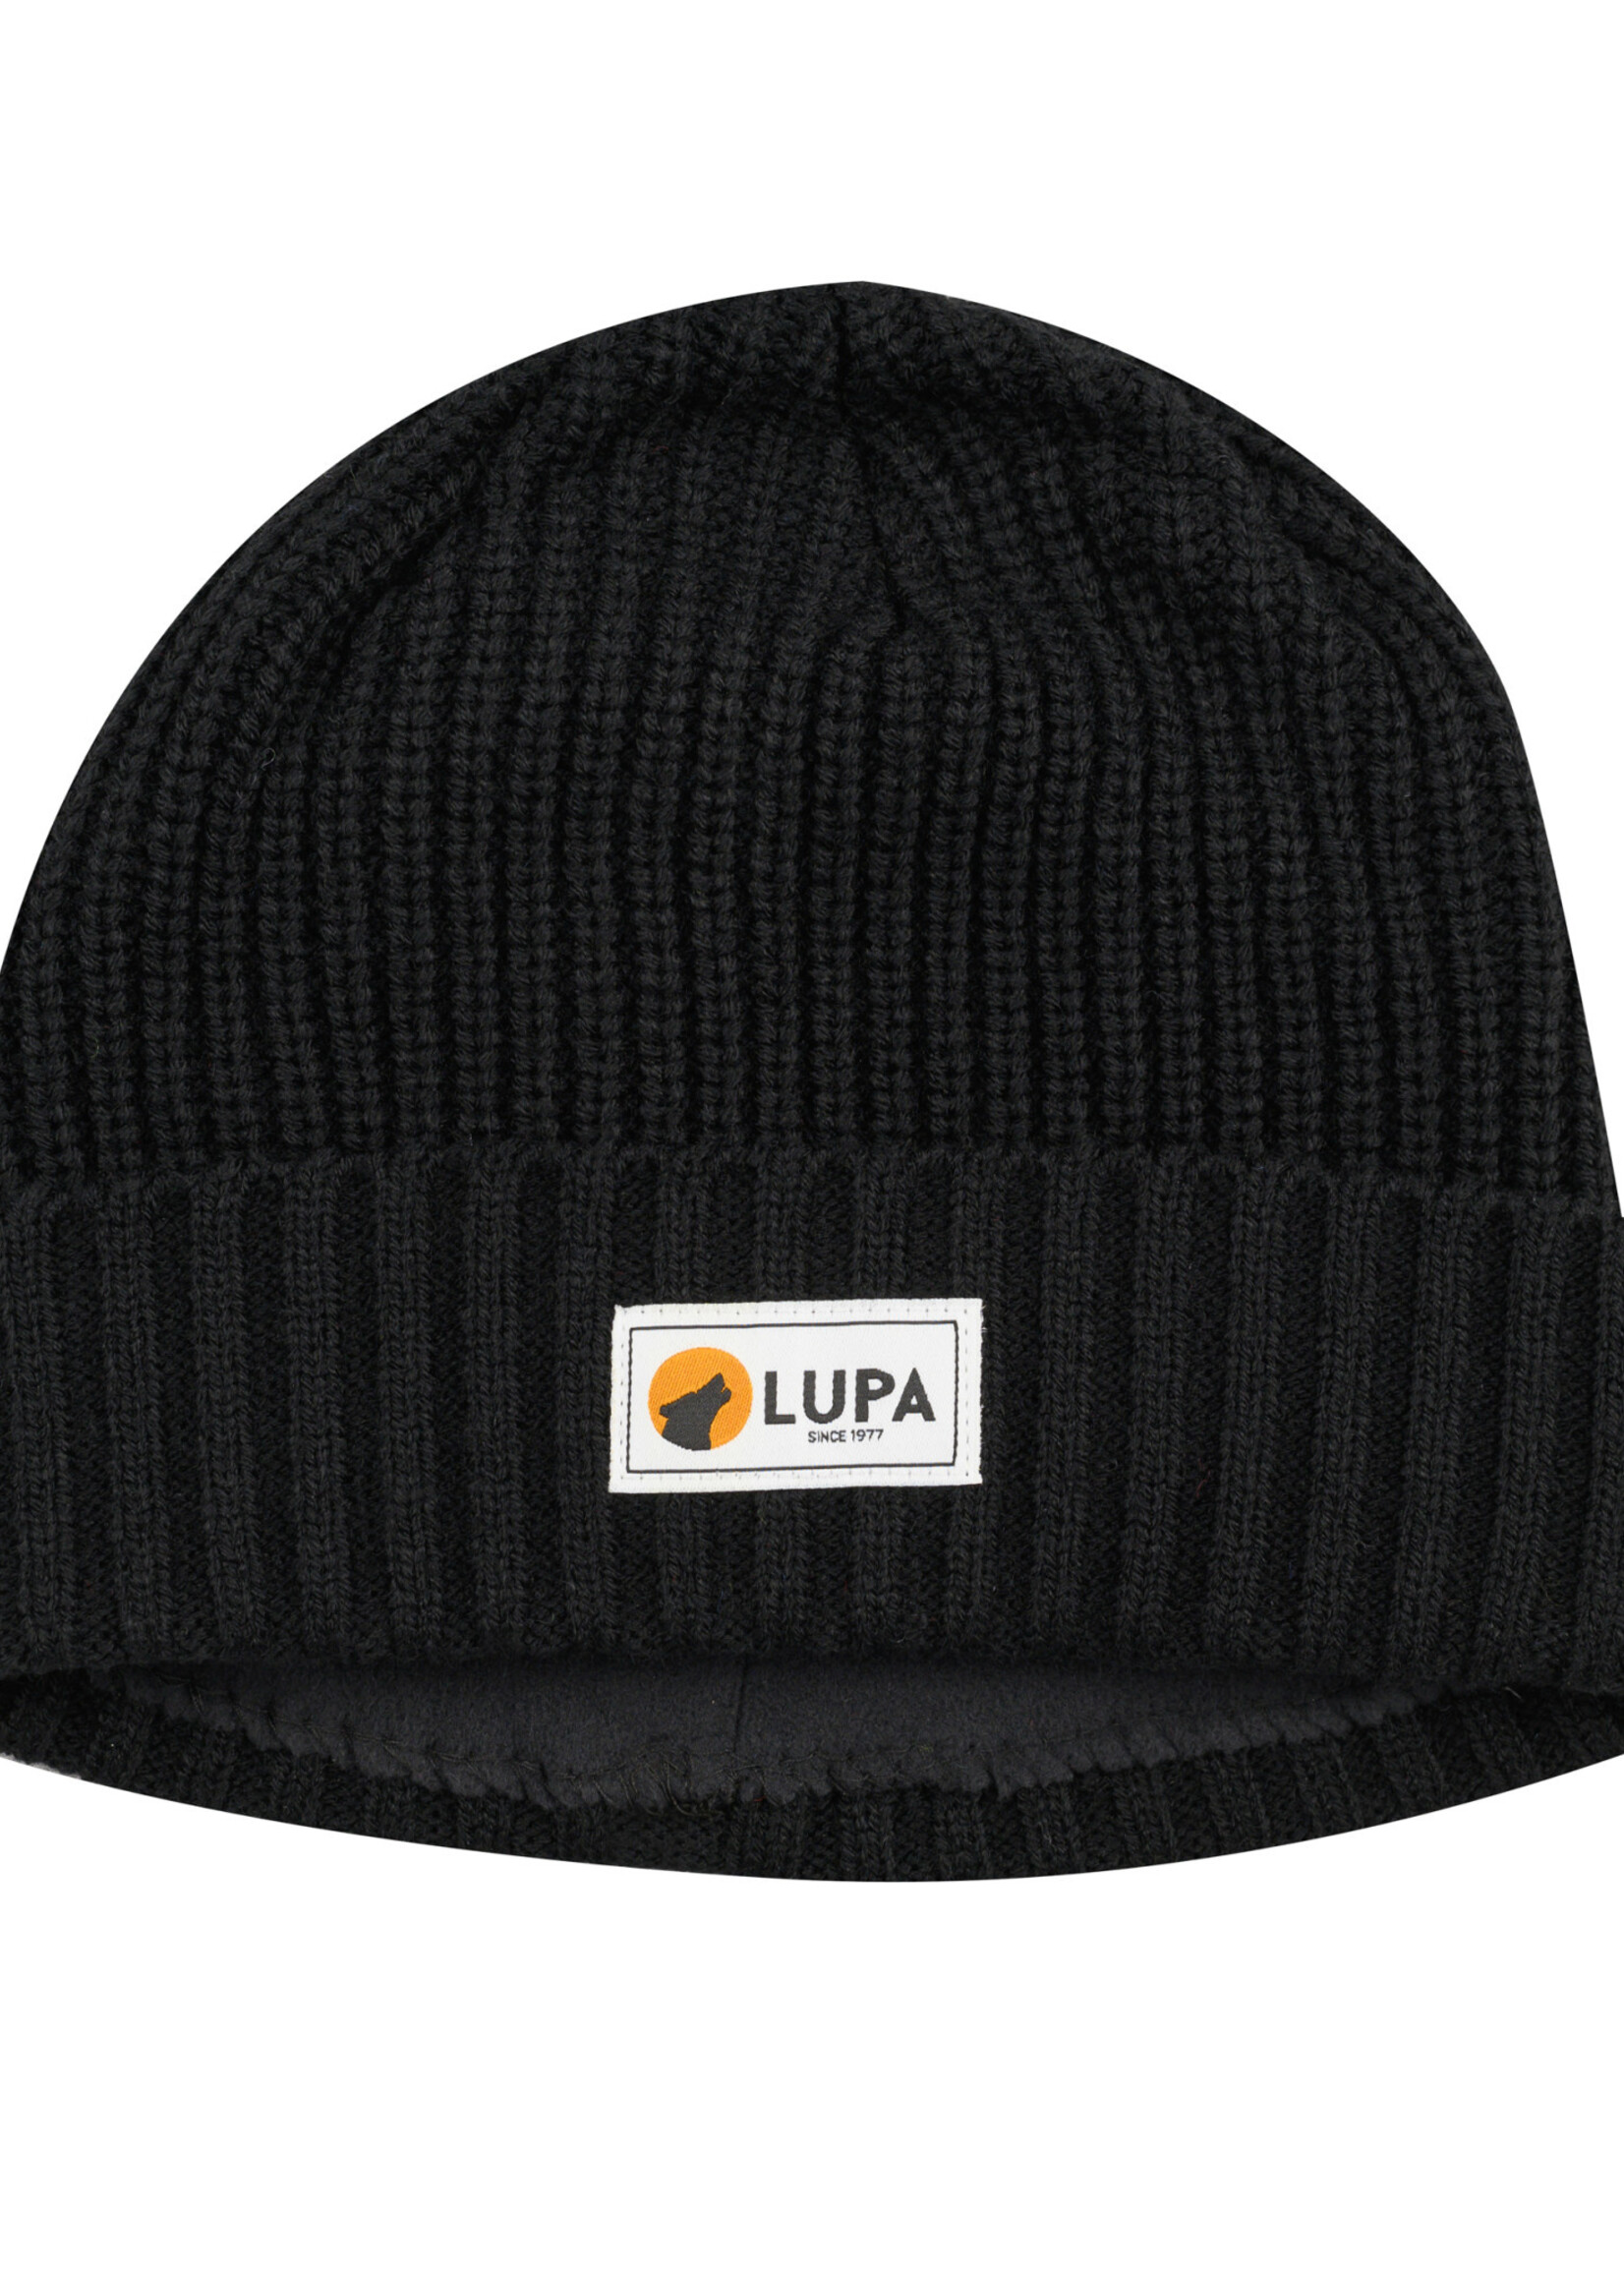 Lupa Lupa Kids Canadian-Made Extreme Cold Beanie